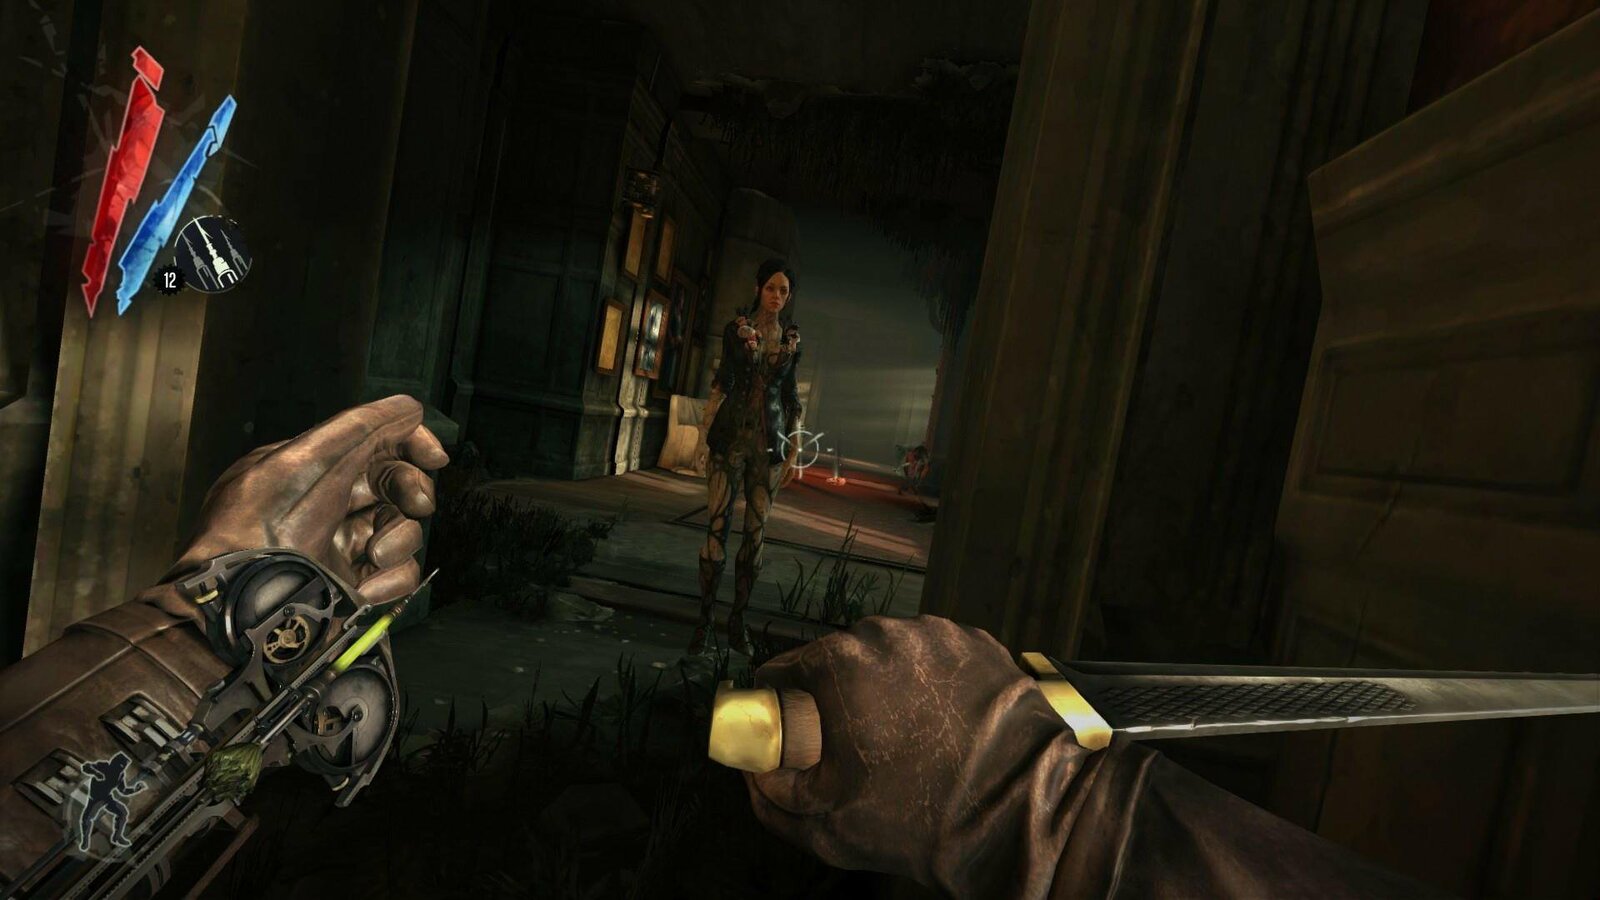 Dishonored - The Brigmore Witches